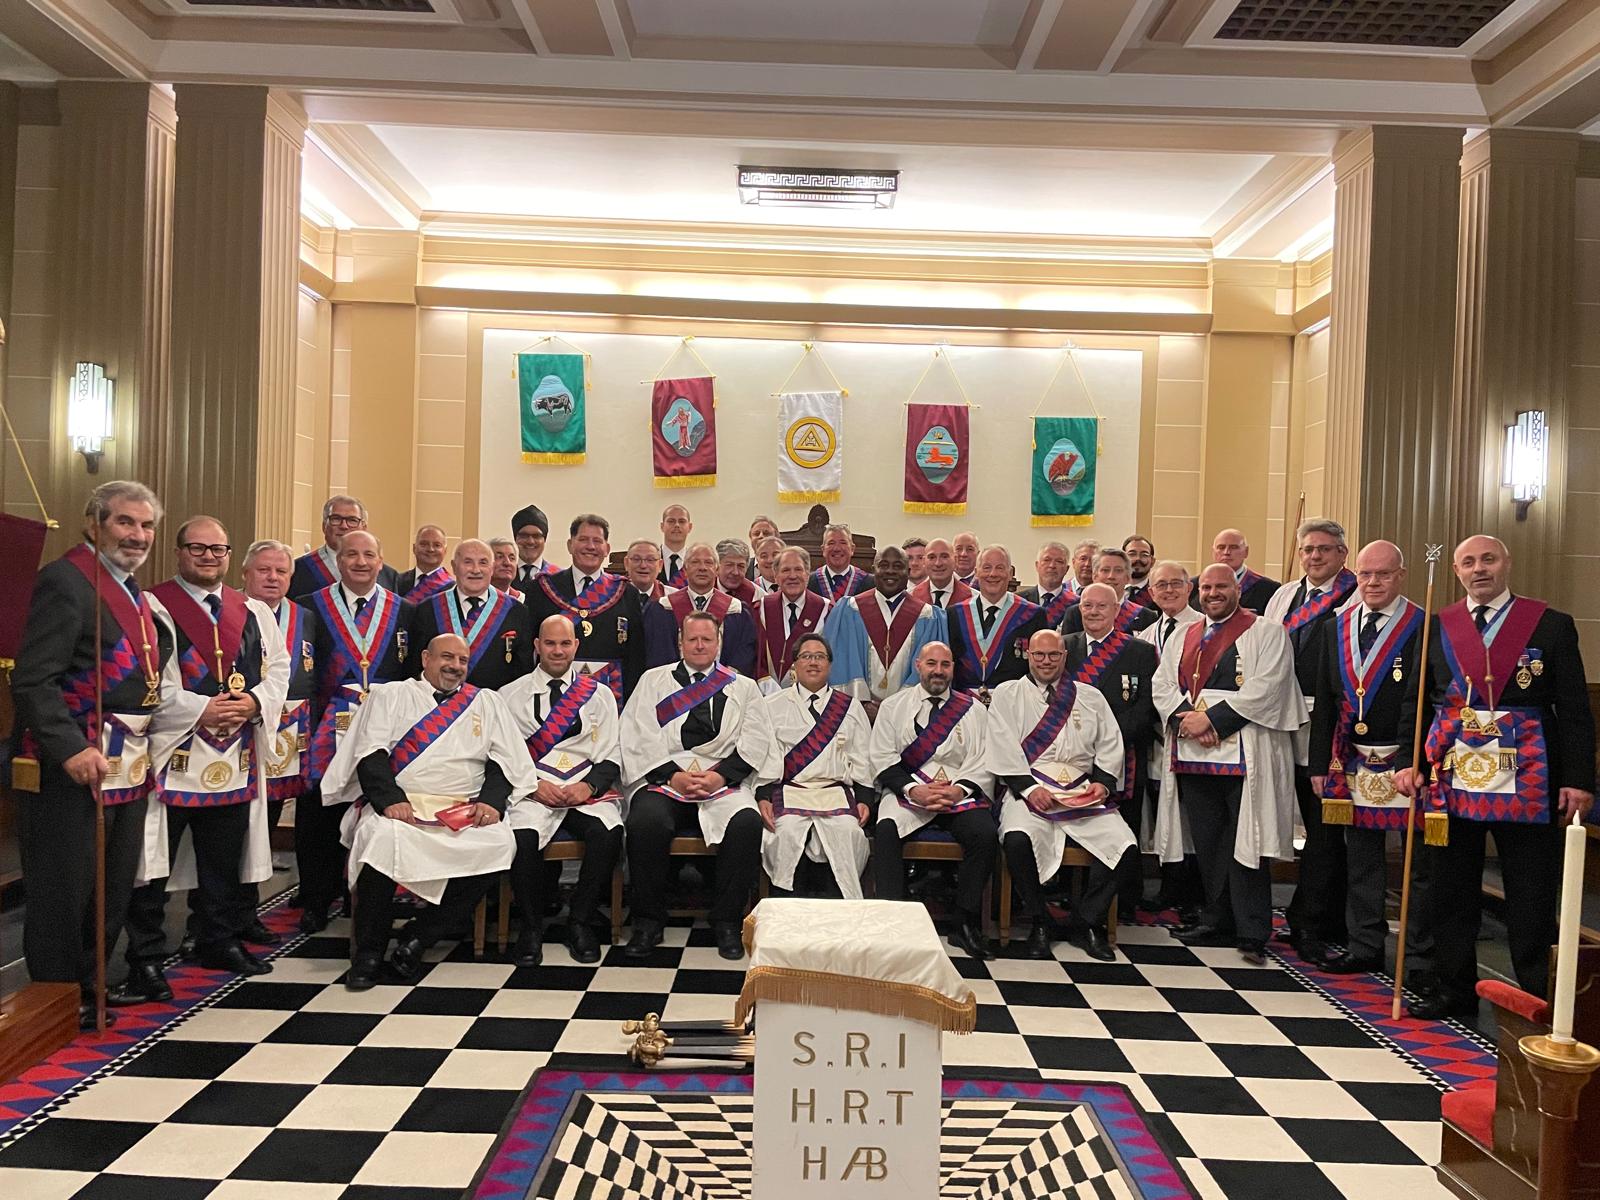 Middlesex Freemasons in Royal Arch Regalia after an Exaltation Ceremony